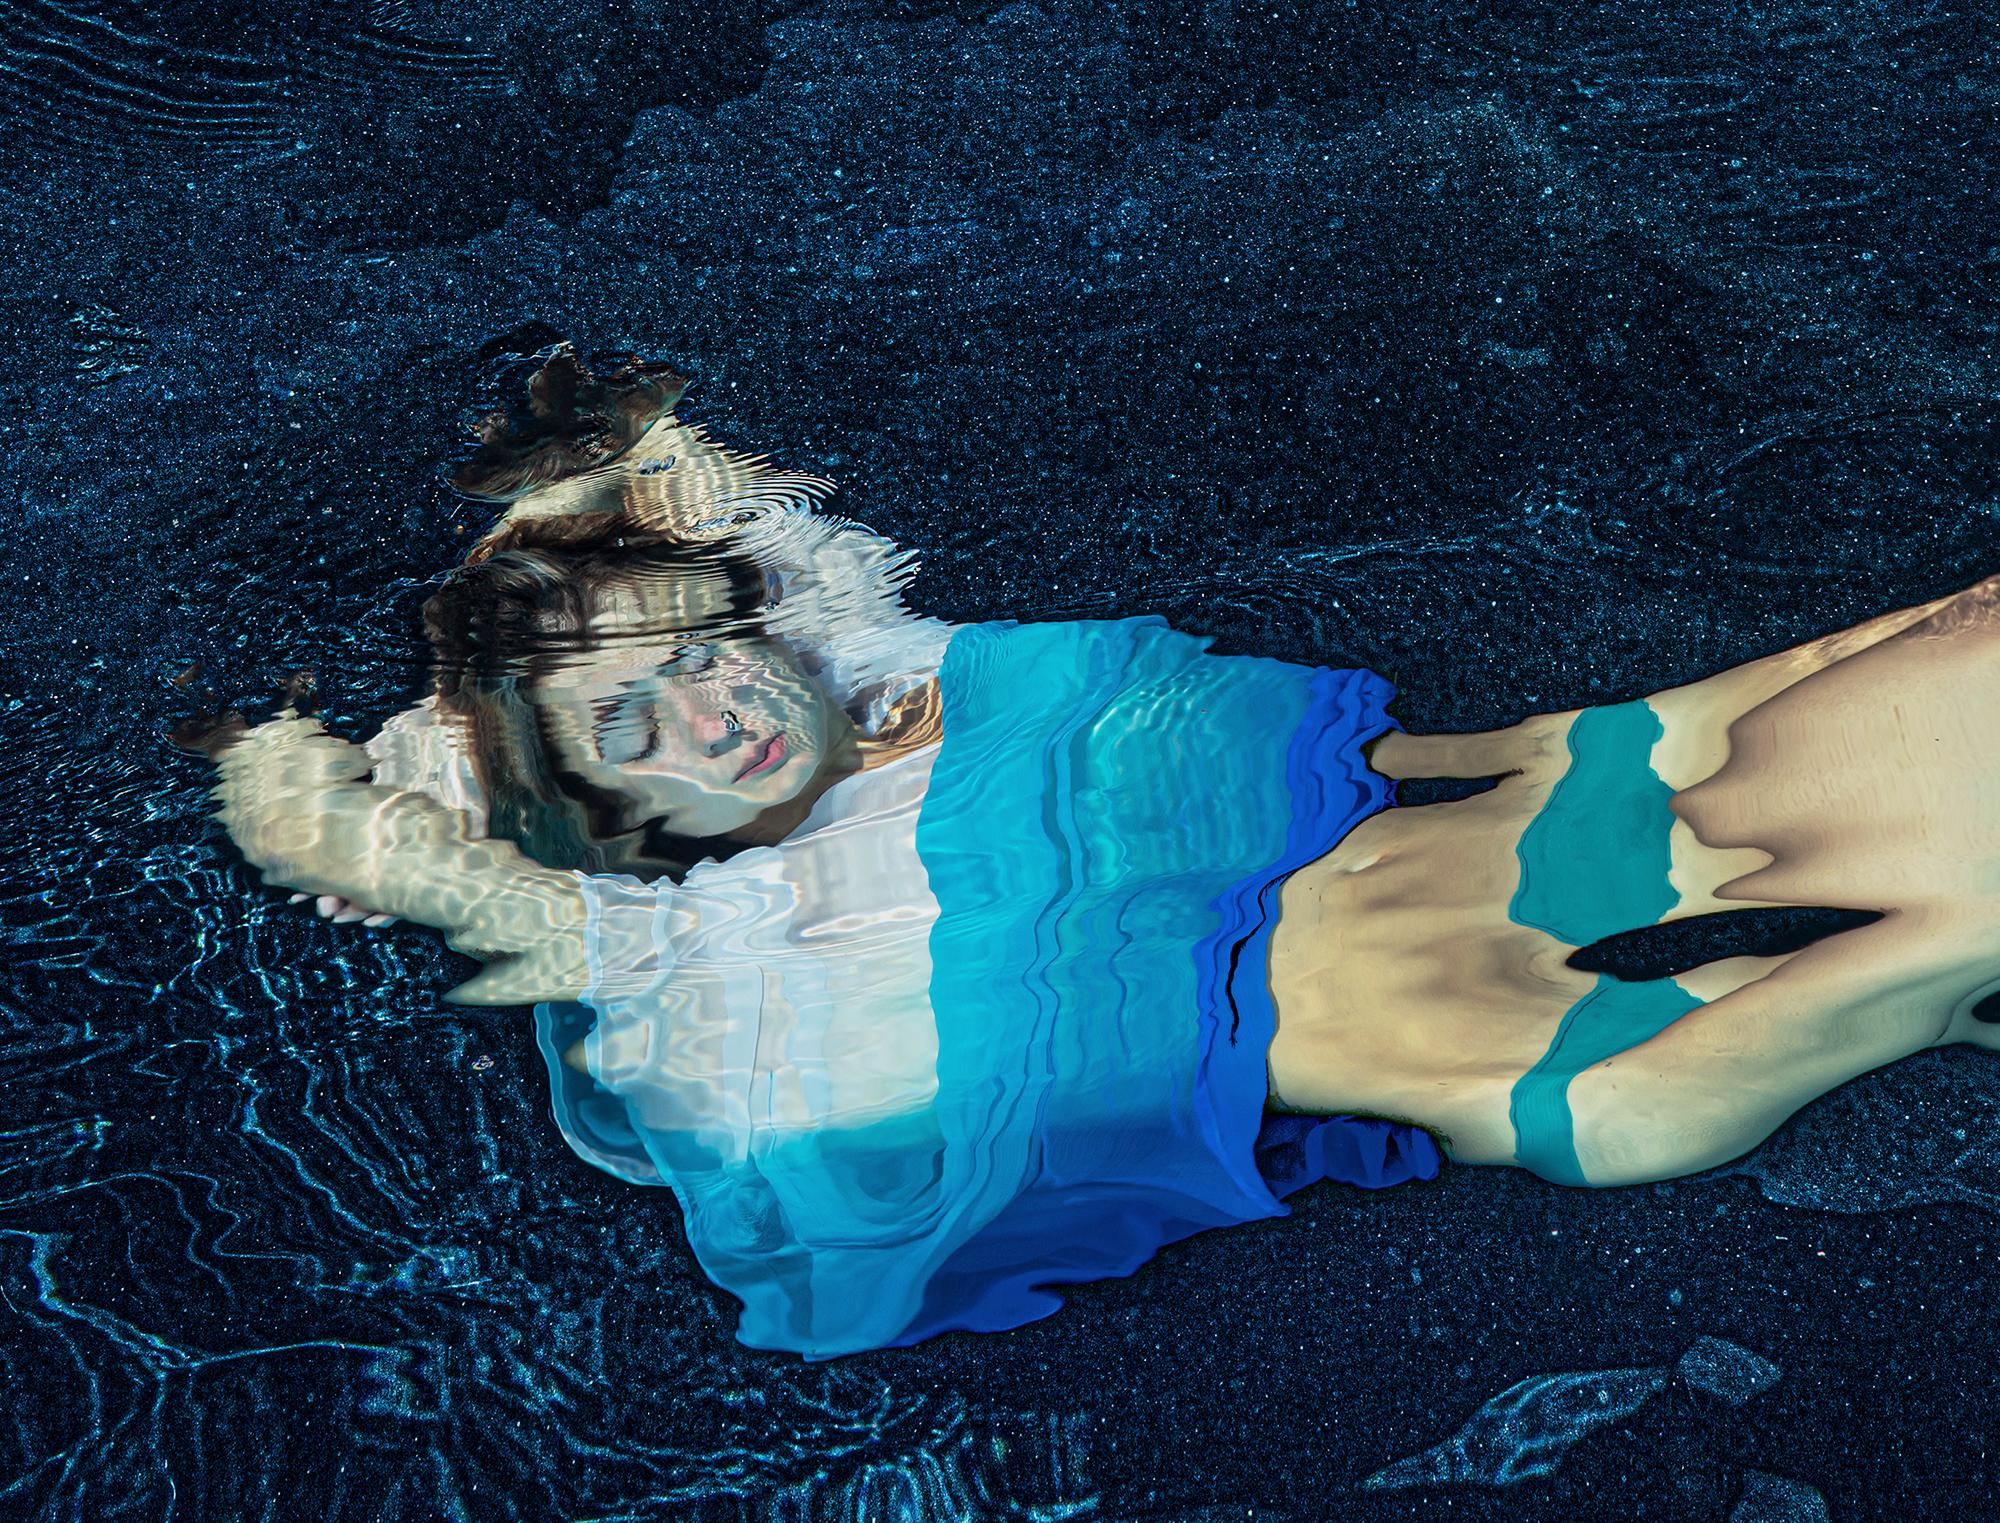 Anesthesia - underwater photograph series REFLECTIONS - archival pigment 23x35